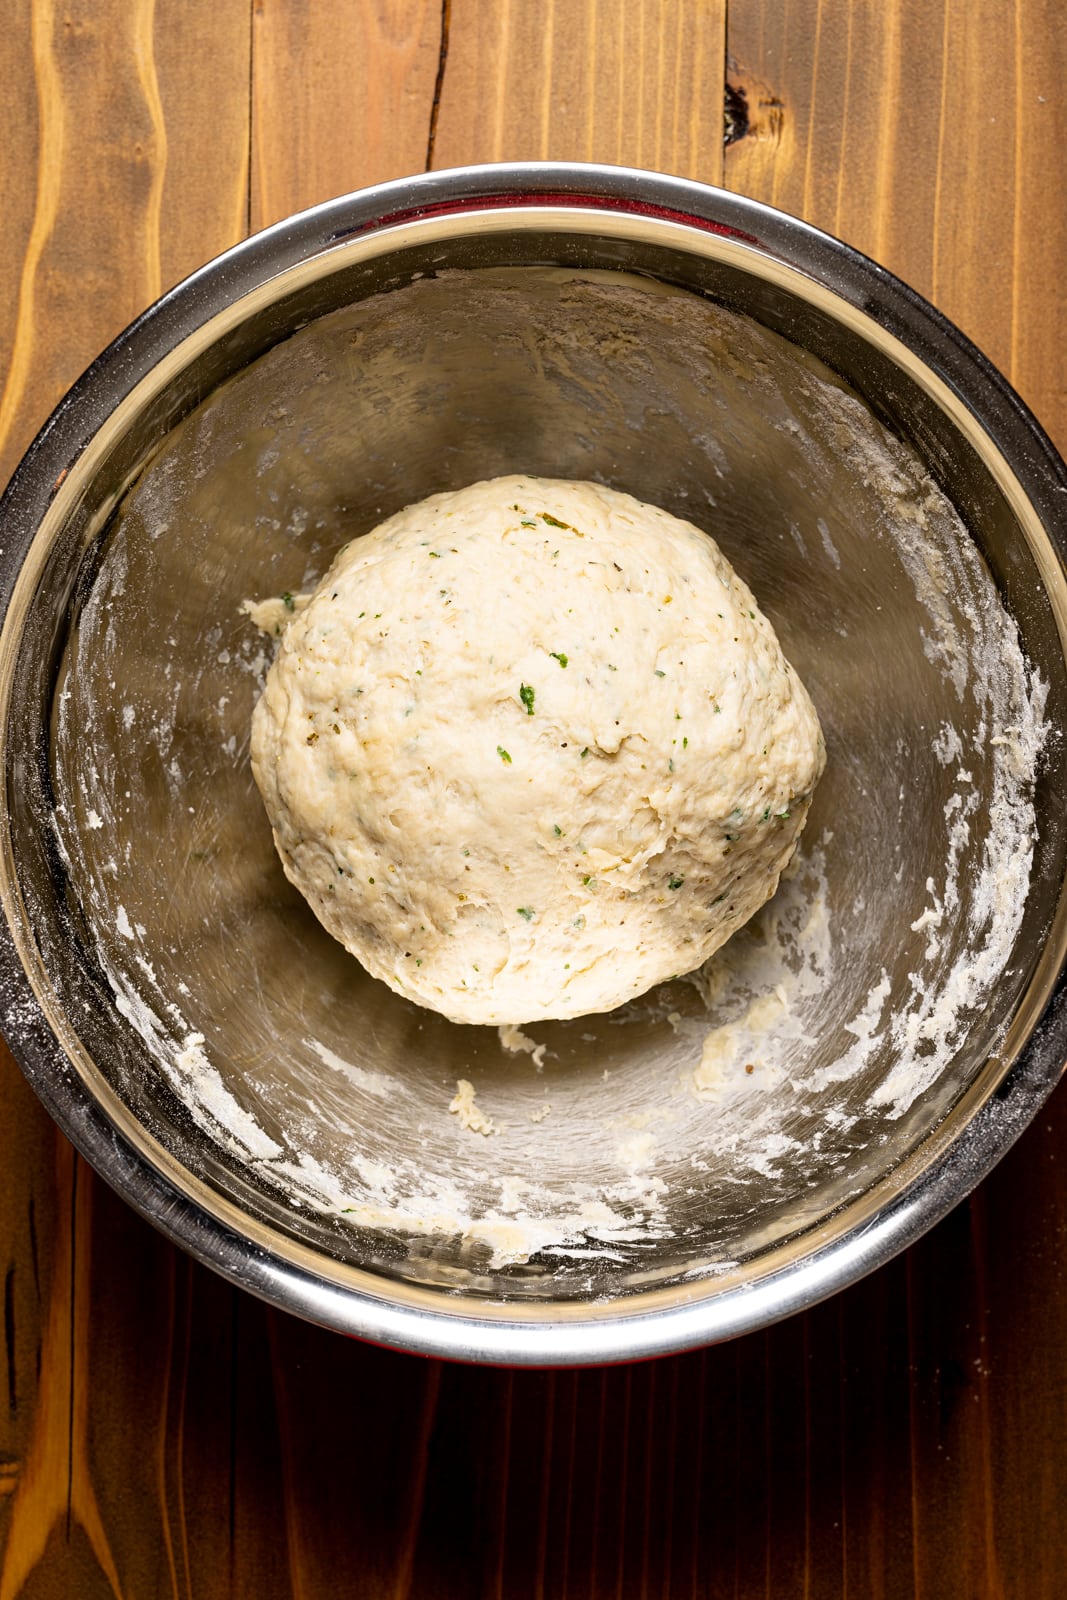 Dough in a large silver bowl on a brown wood table.